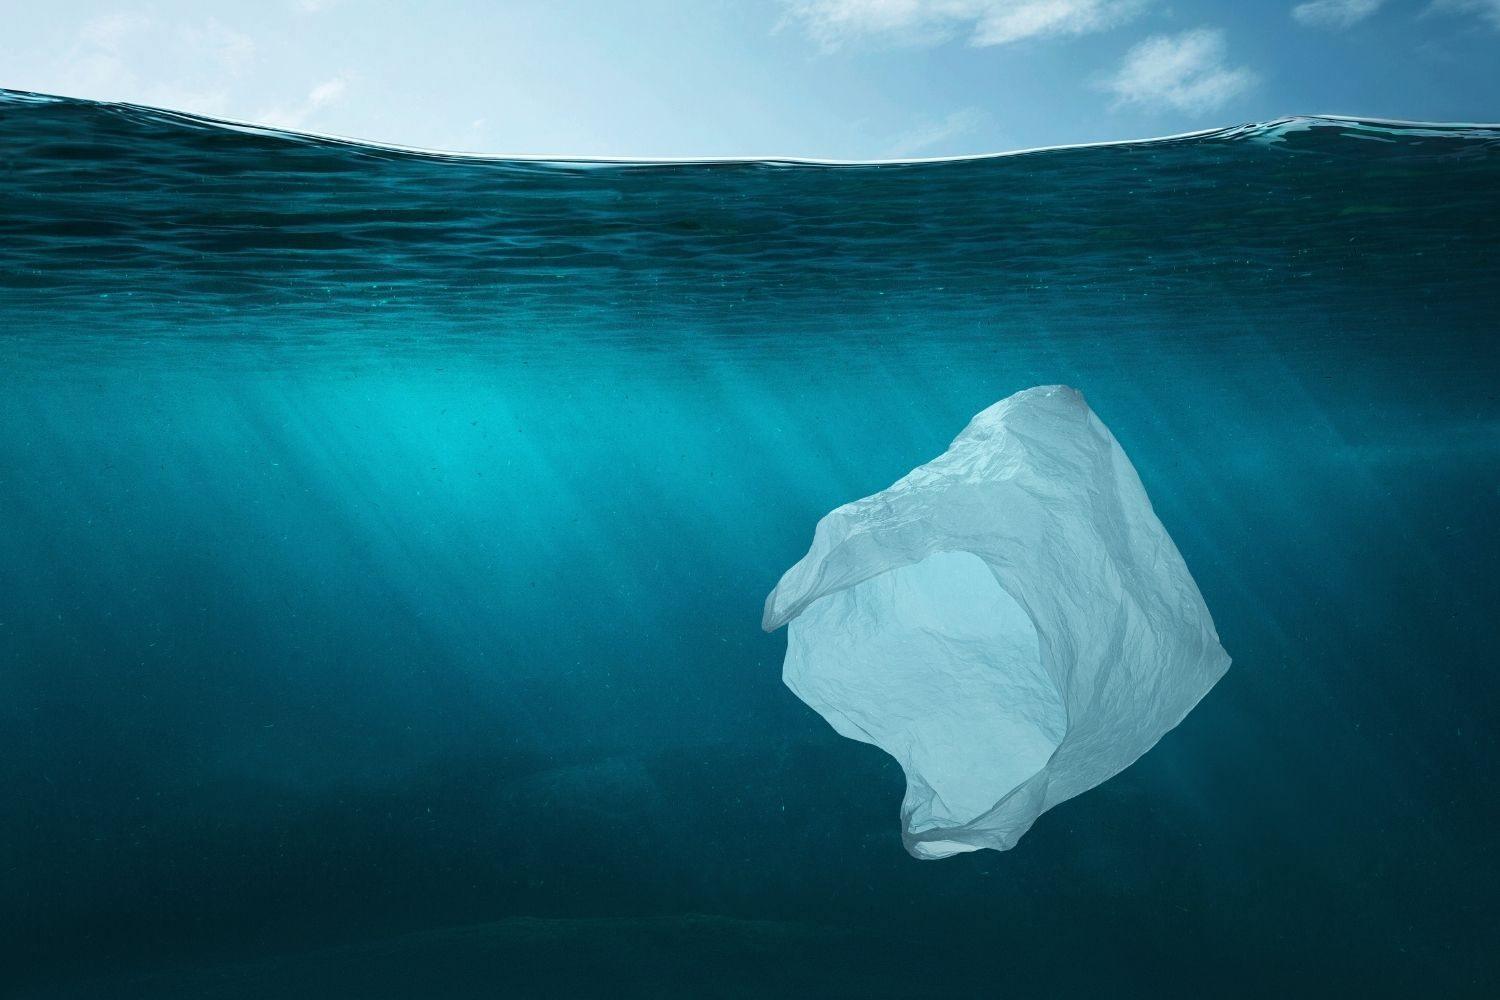 10p CHARGE FOR SINGLE-USE PLASTIC BAGS: THE BEST REUSABLE ALTERNATIVES - Hoesh International Ltd